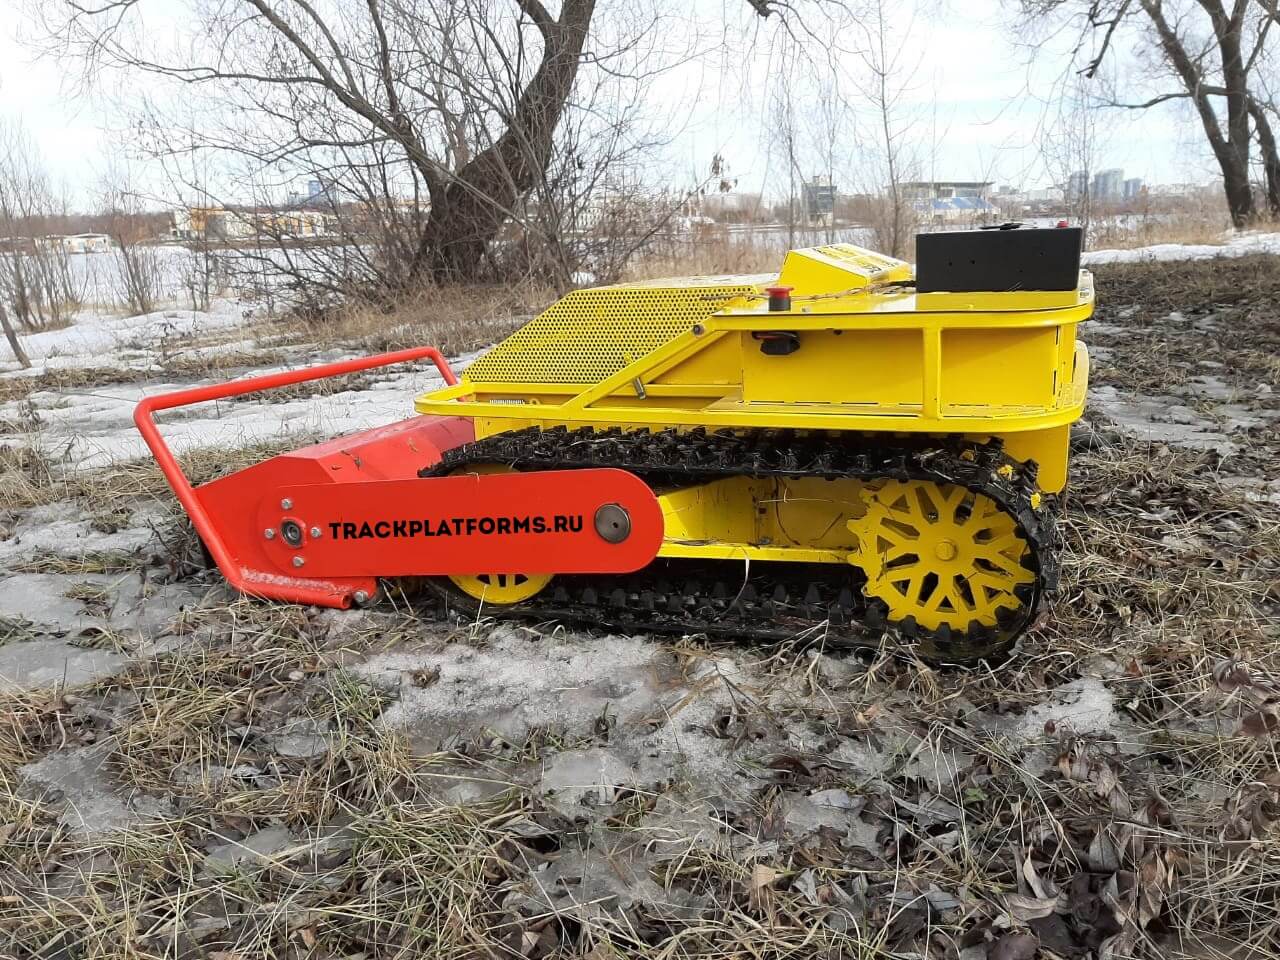 MONOTRACK tracked robot. Robot tracked chassis